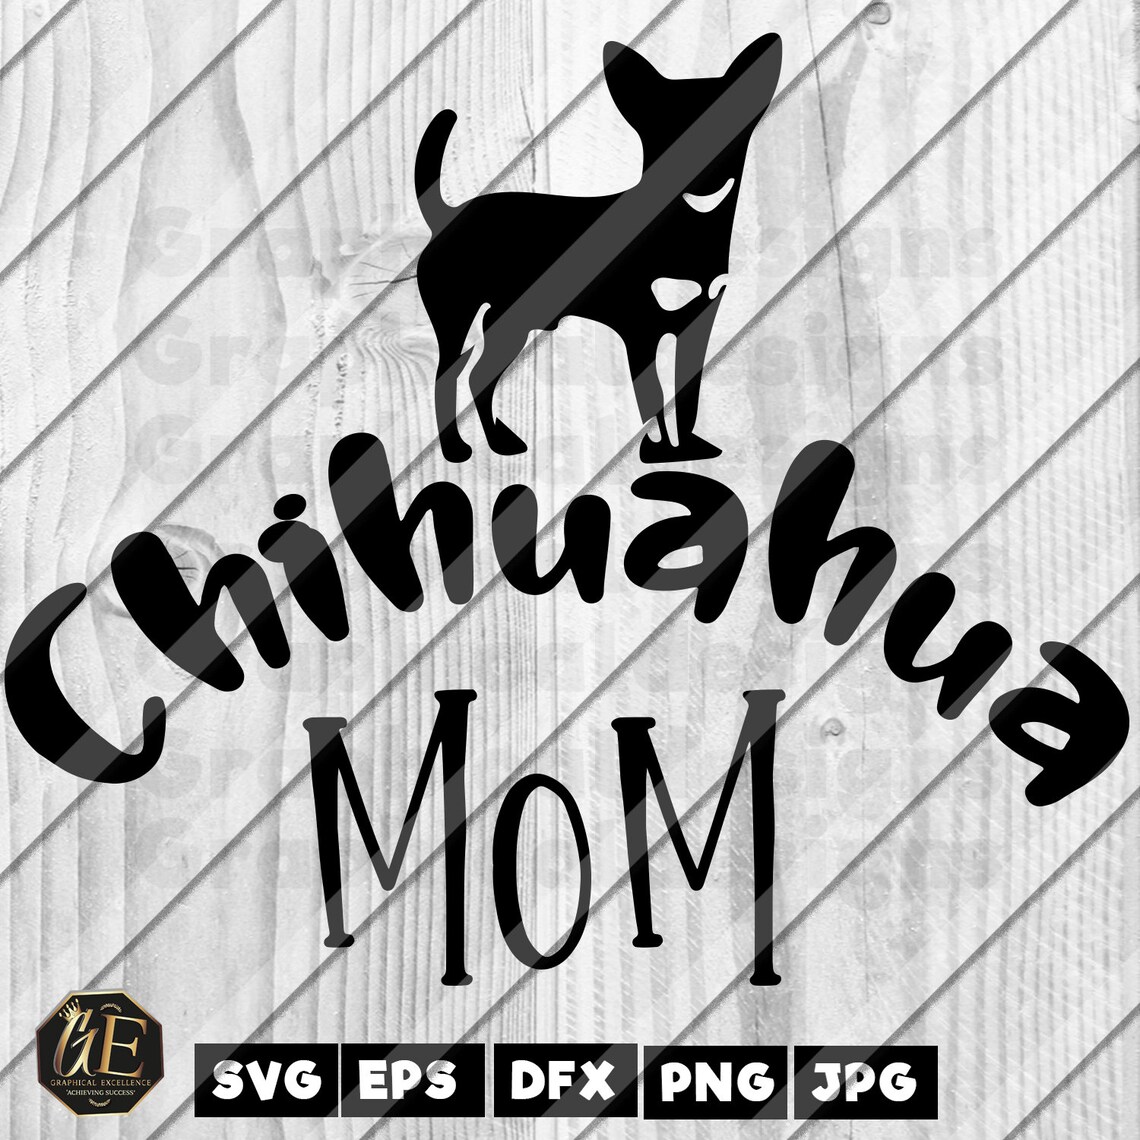 Chihuahua Mom Instant Download Cutting Files Svg Dxf Jpg - Etsy